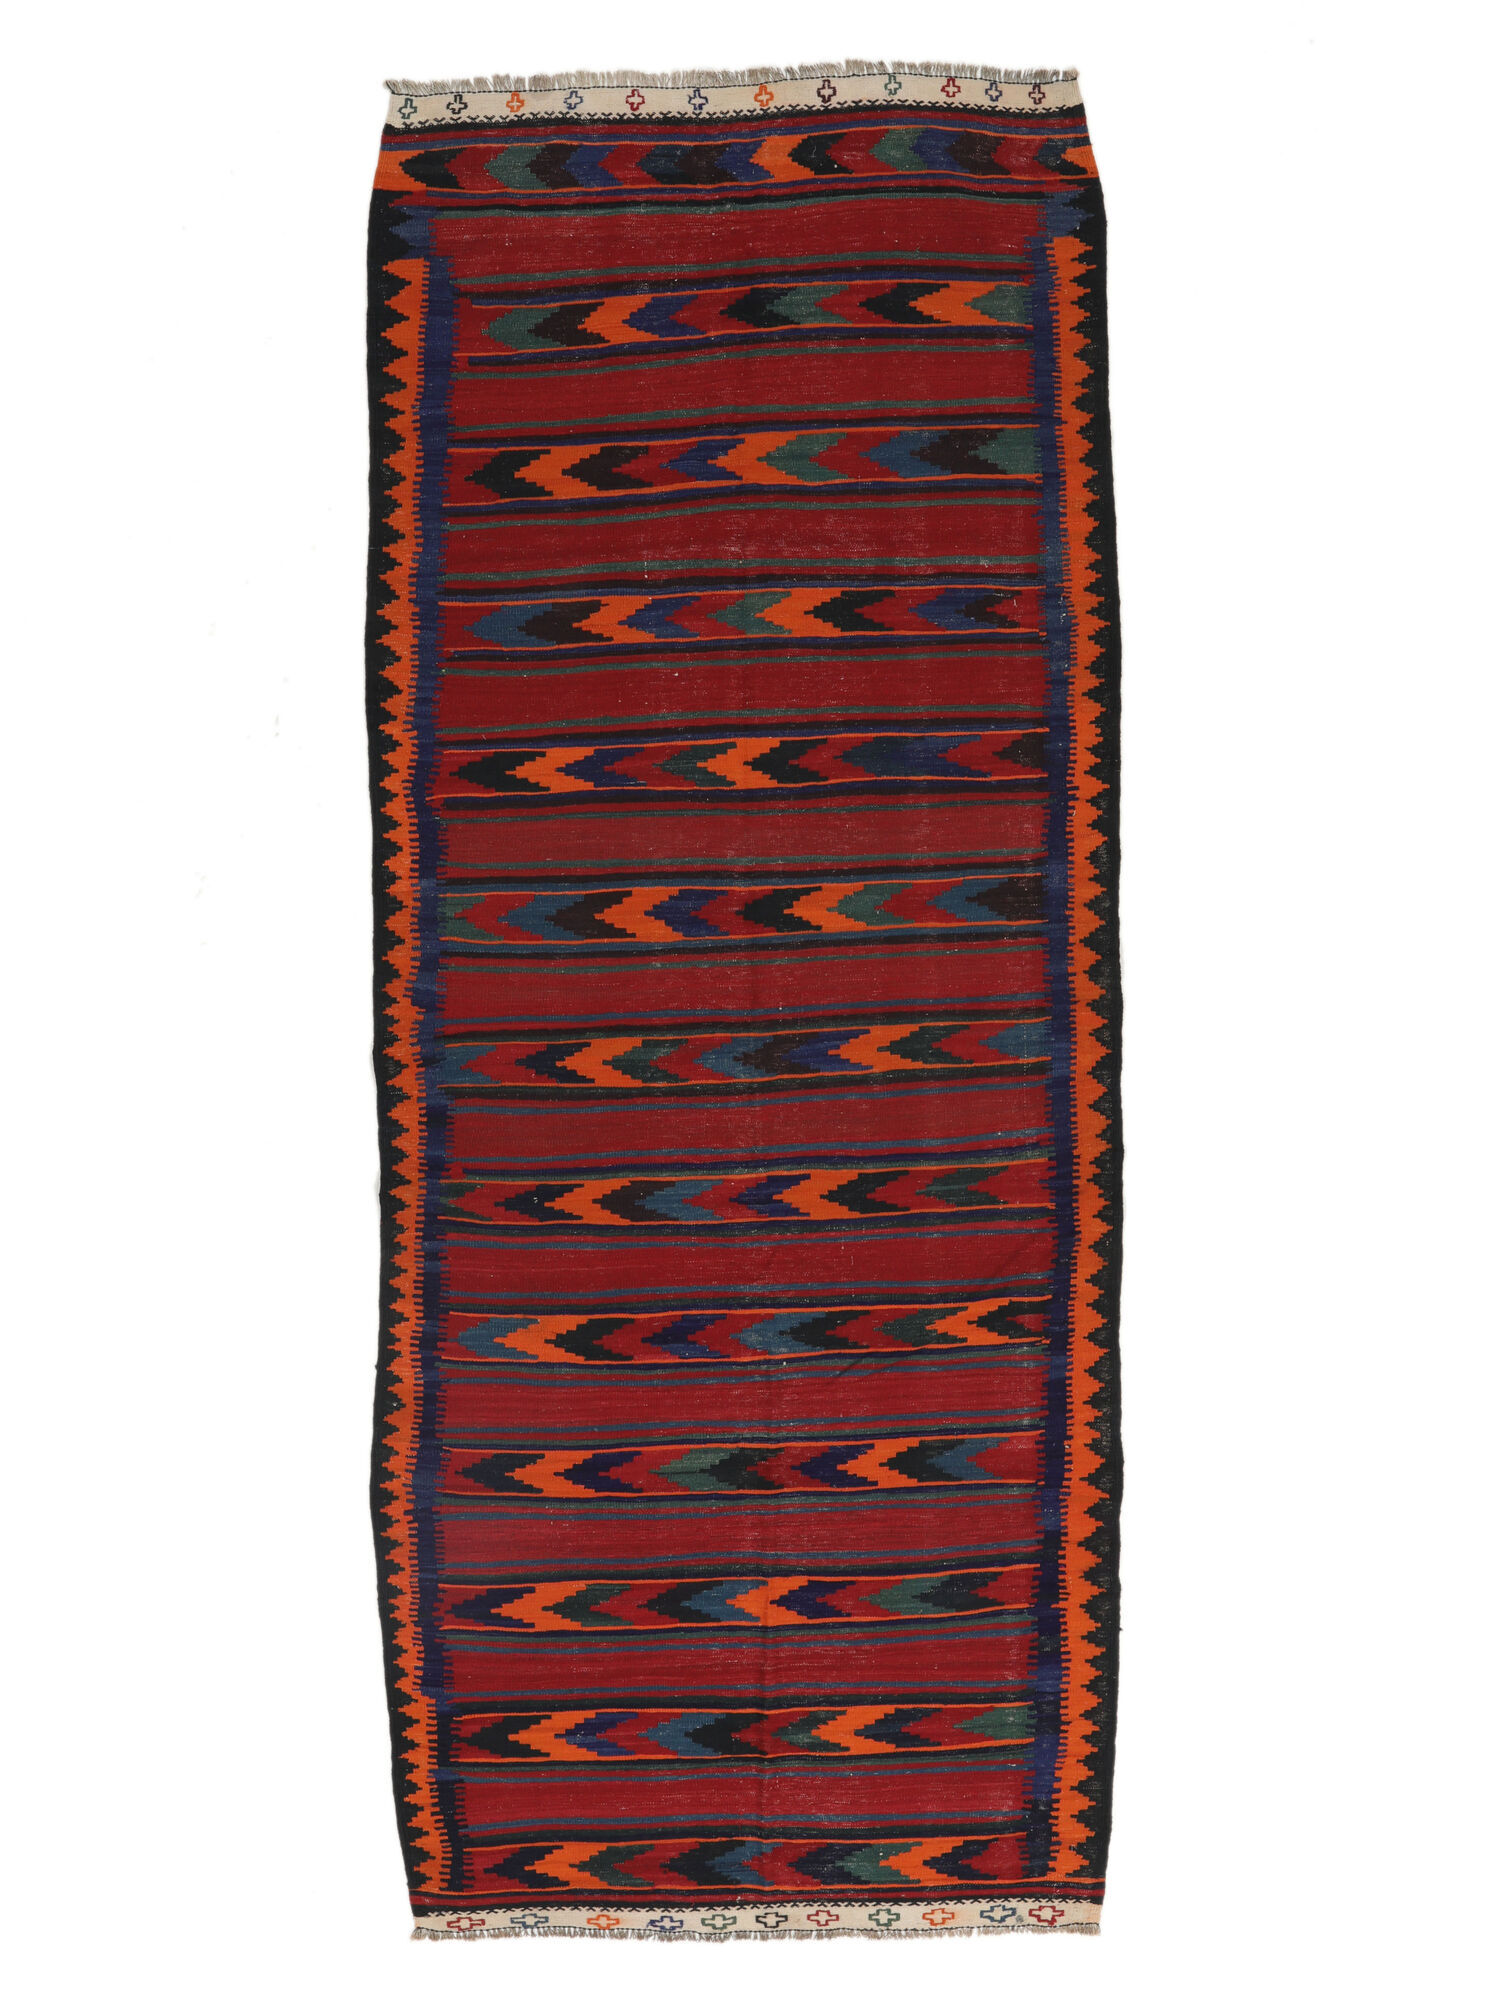 Annodato a mano. Provenienza: Afghanistan Afghan Vintage Kilim Tappeto 147x384